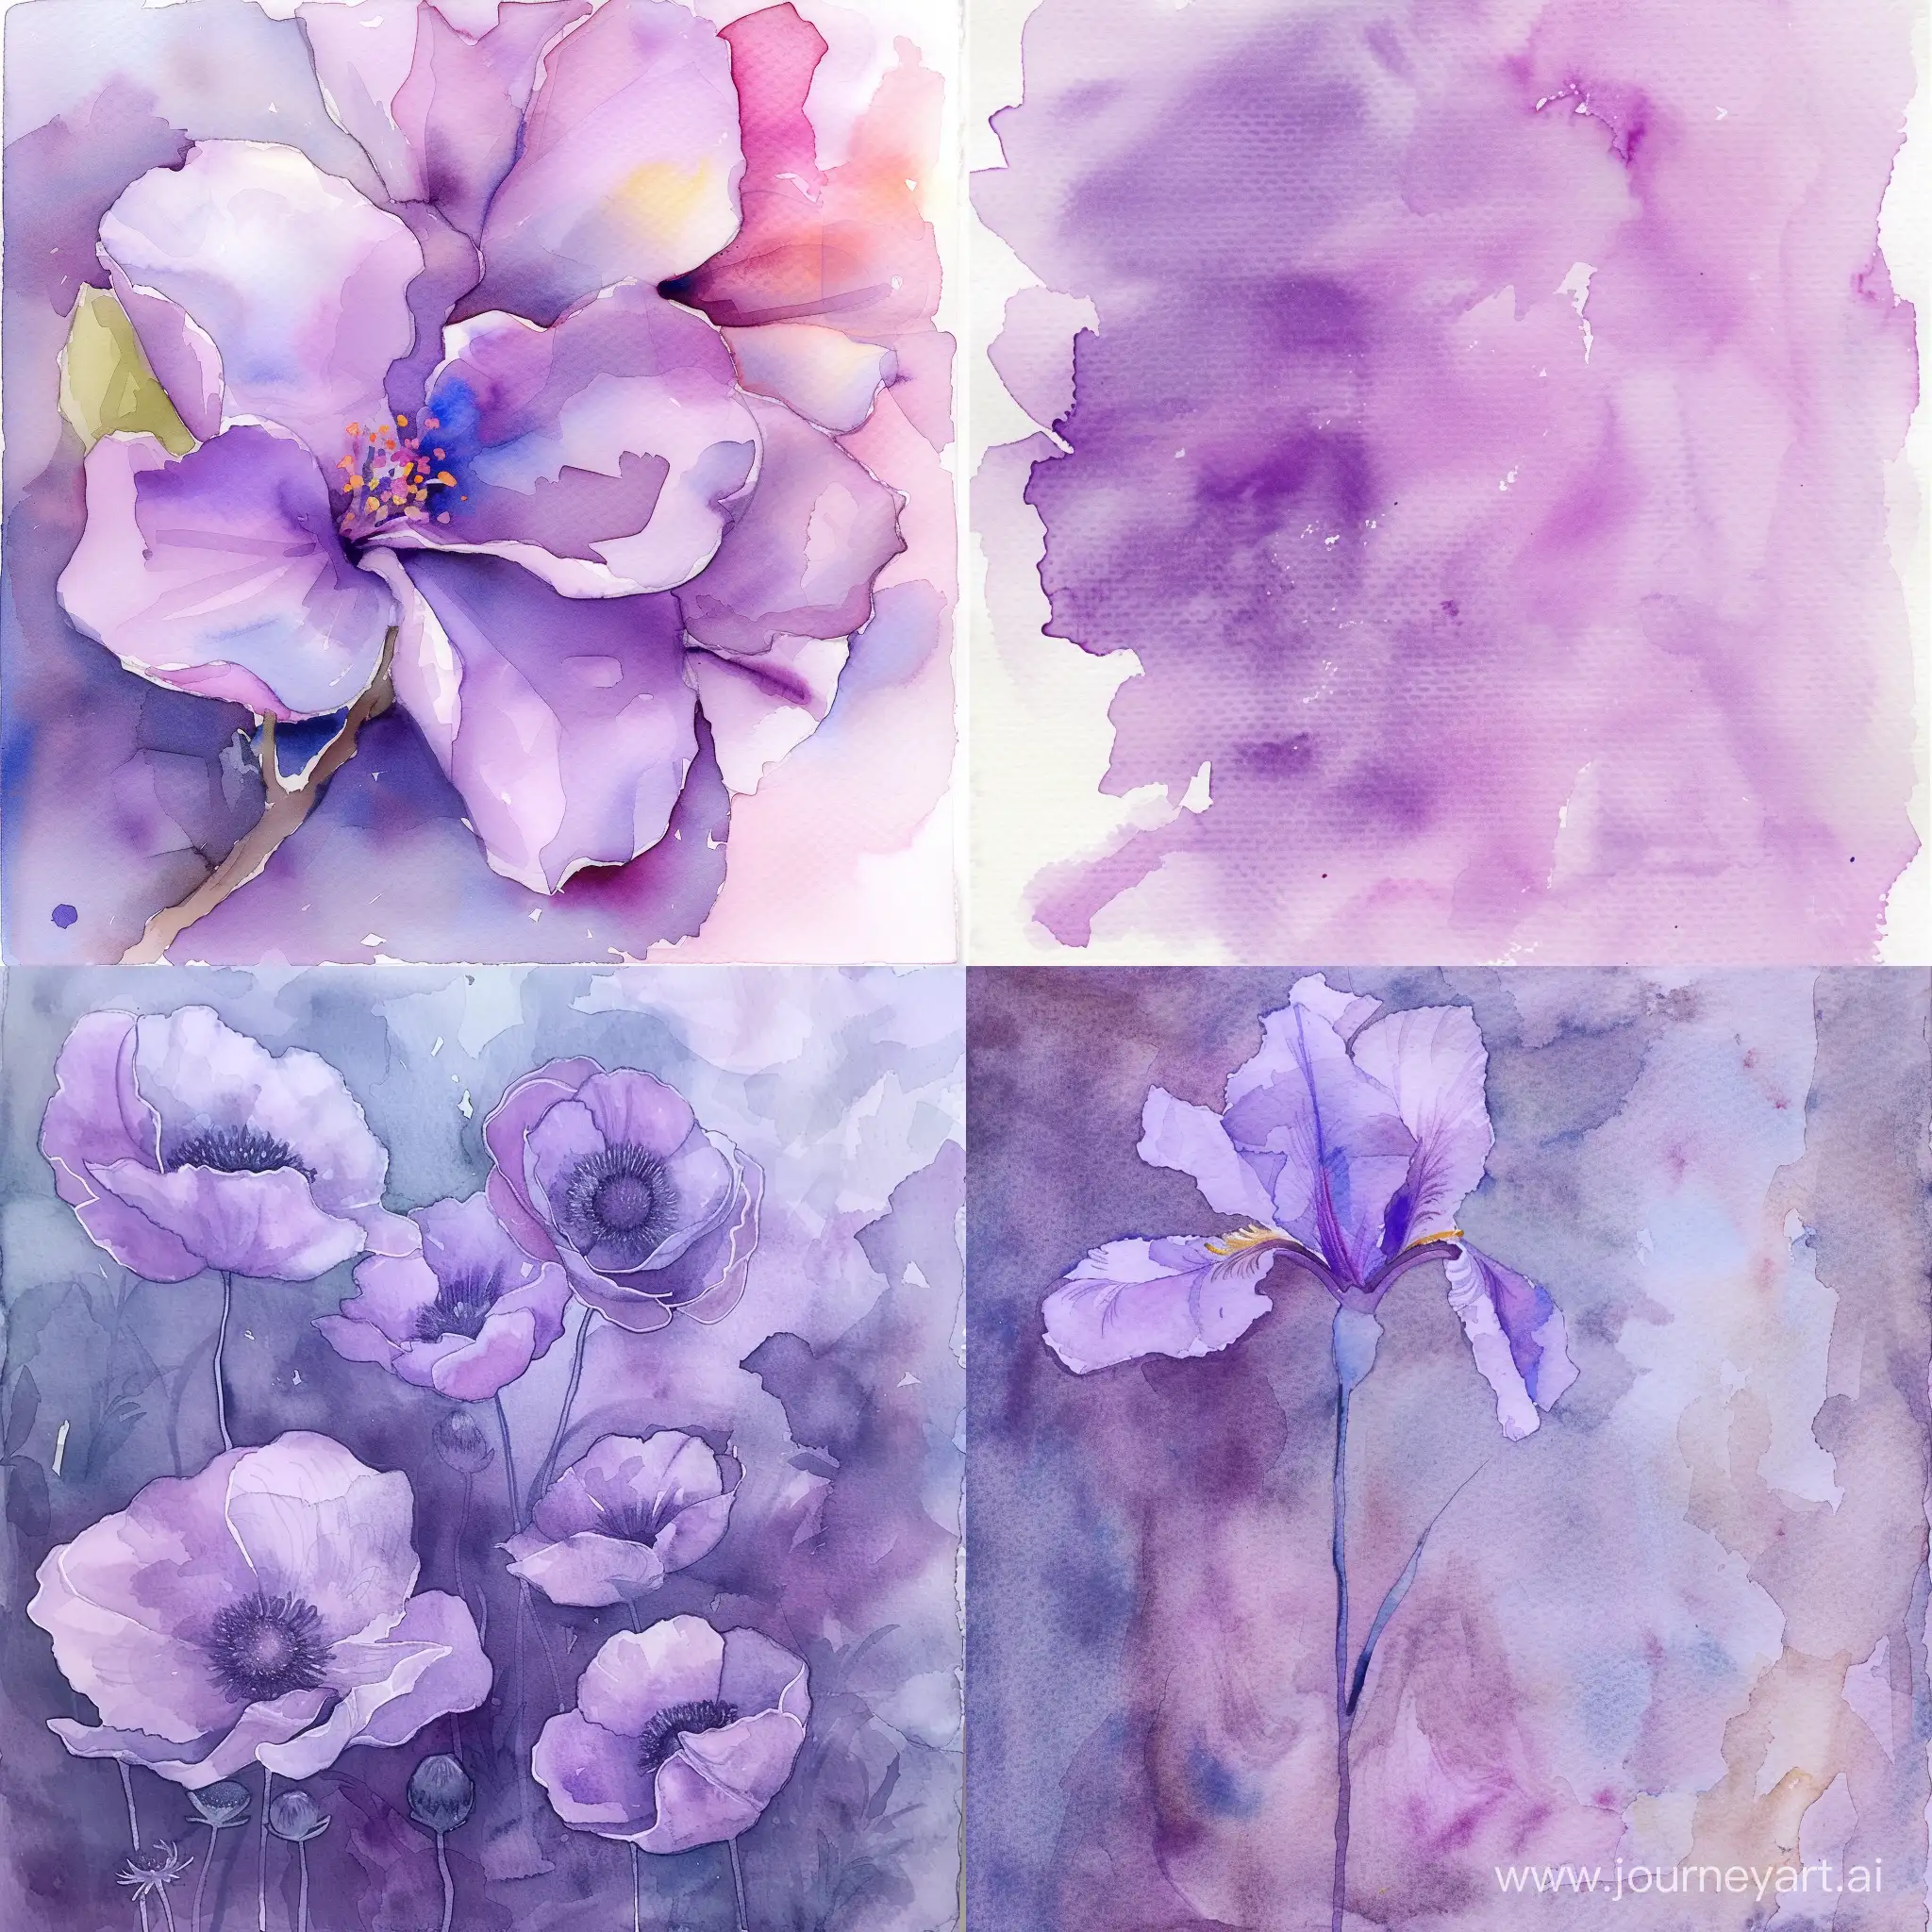 Ethereal-Watercolor-Painting-Serene-Purple-Landscape